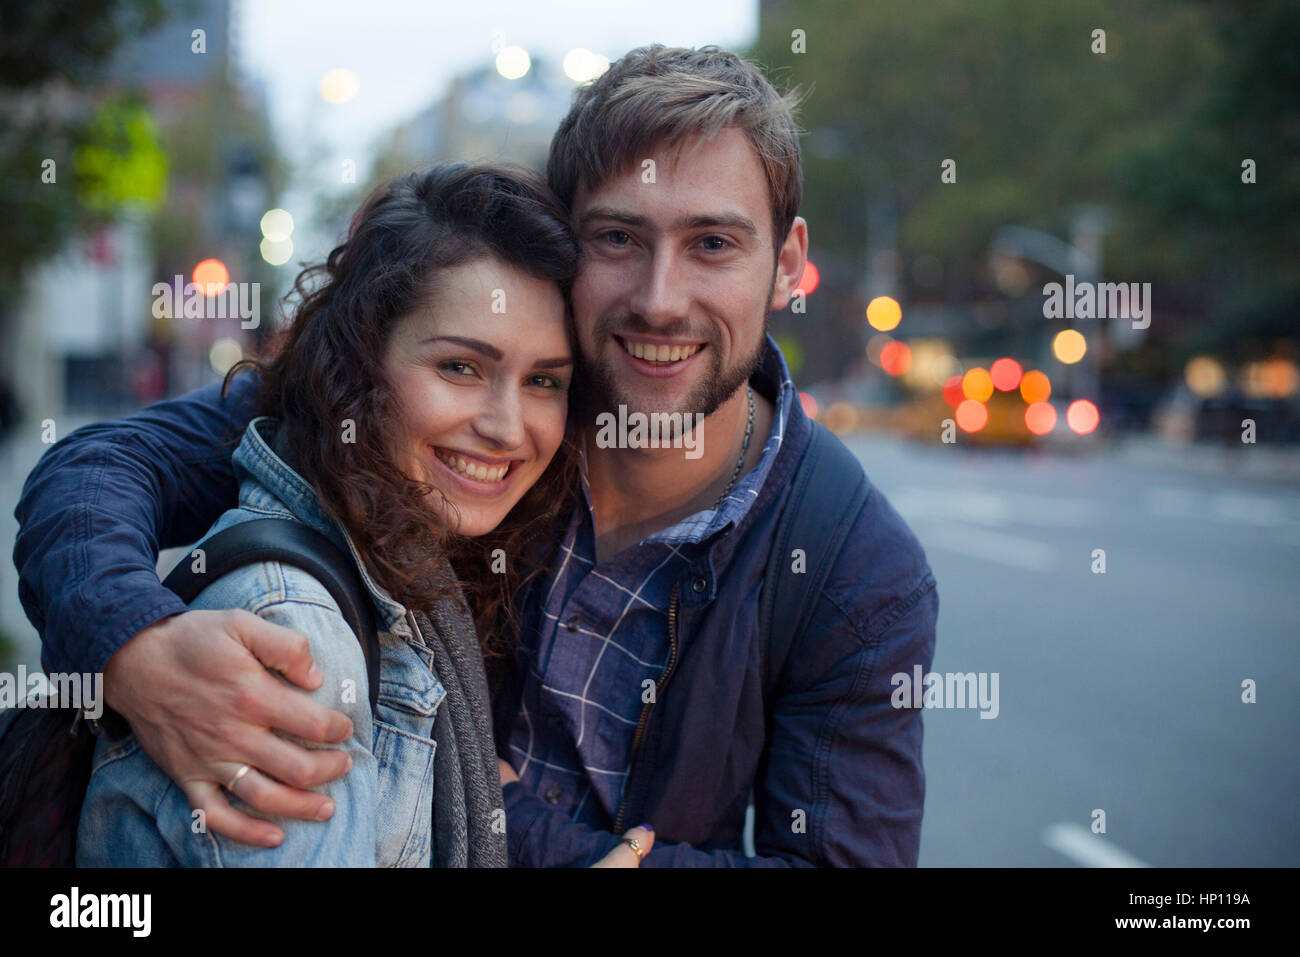 Young couple embracing on city street at night, portrait Stock Photo